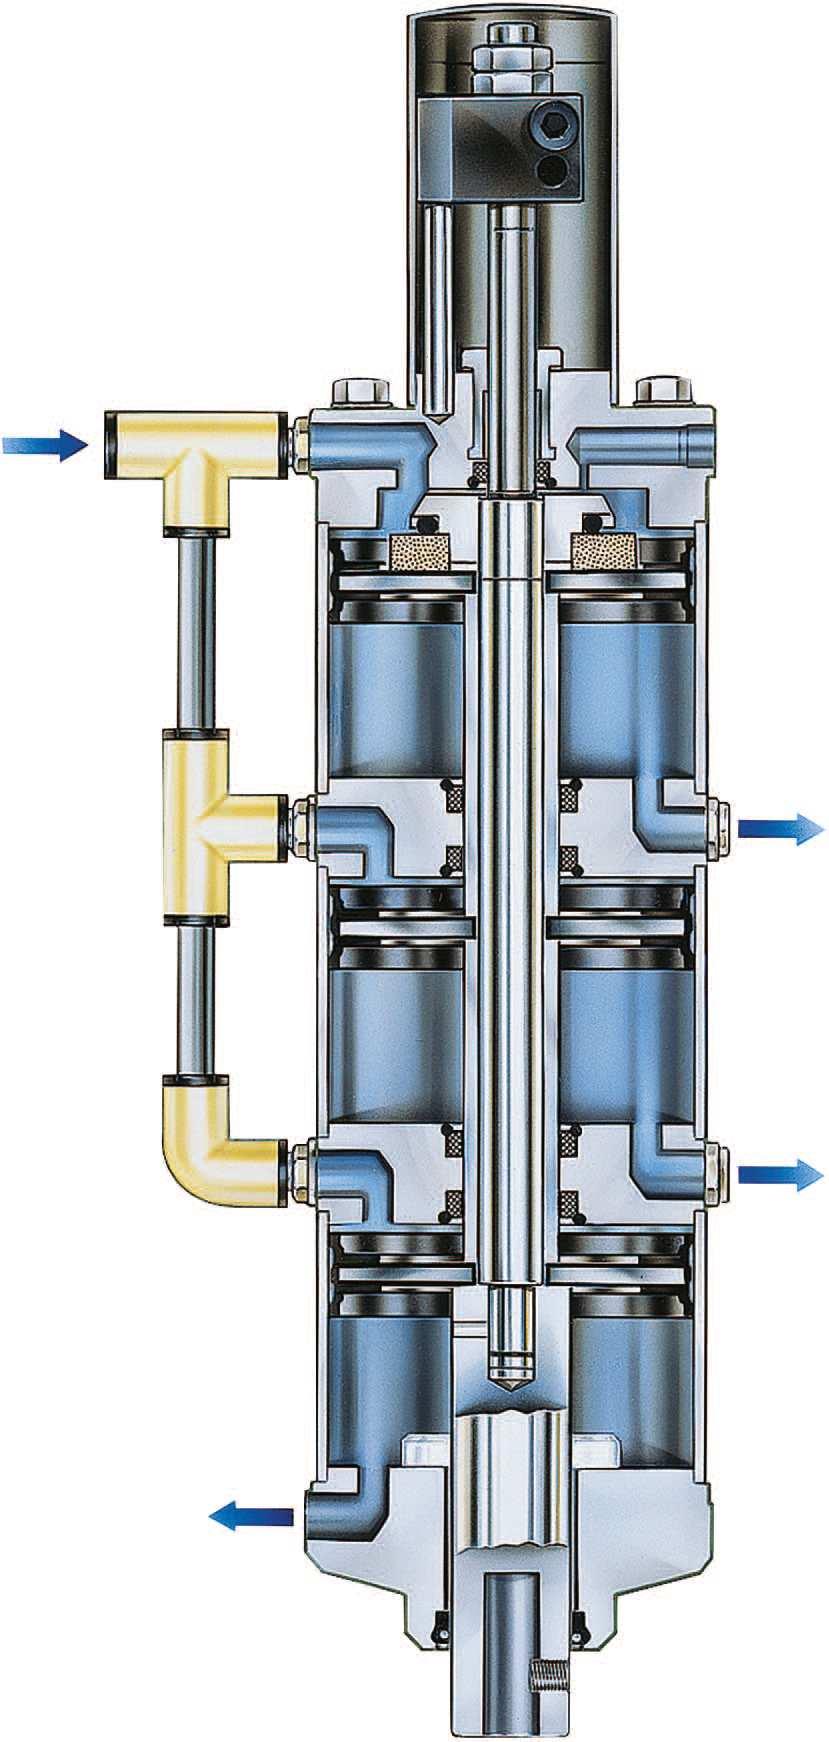 Principle Of Operation unctional Description Using Of a 3-Chamber Pneumatic Cylinder As An Example In working stroke, three pistons 7 connected by the piston rod 6 are pressurized with compressed air